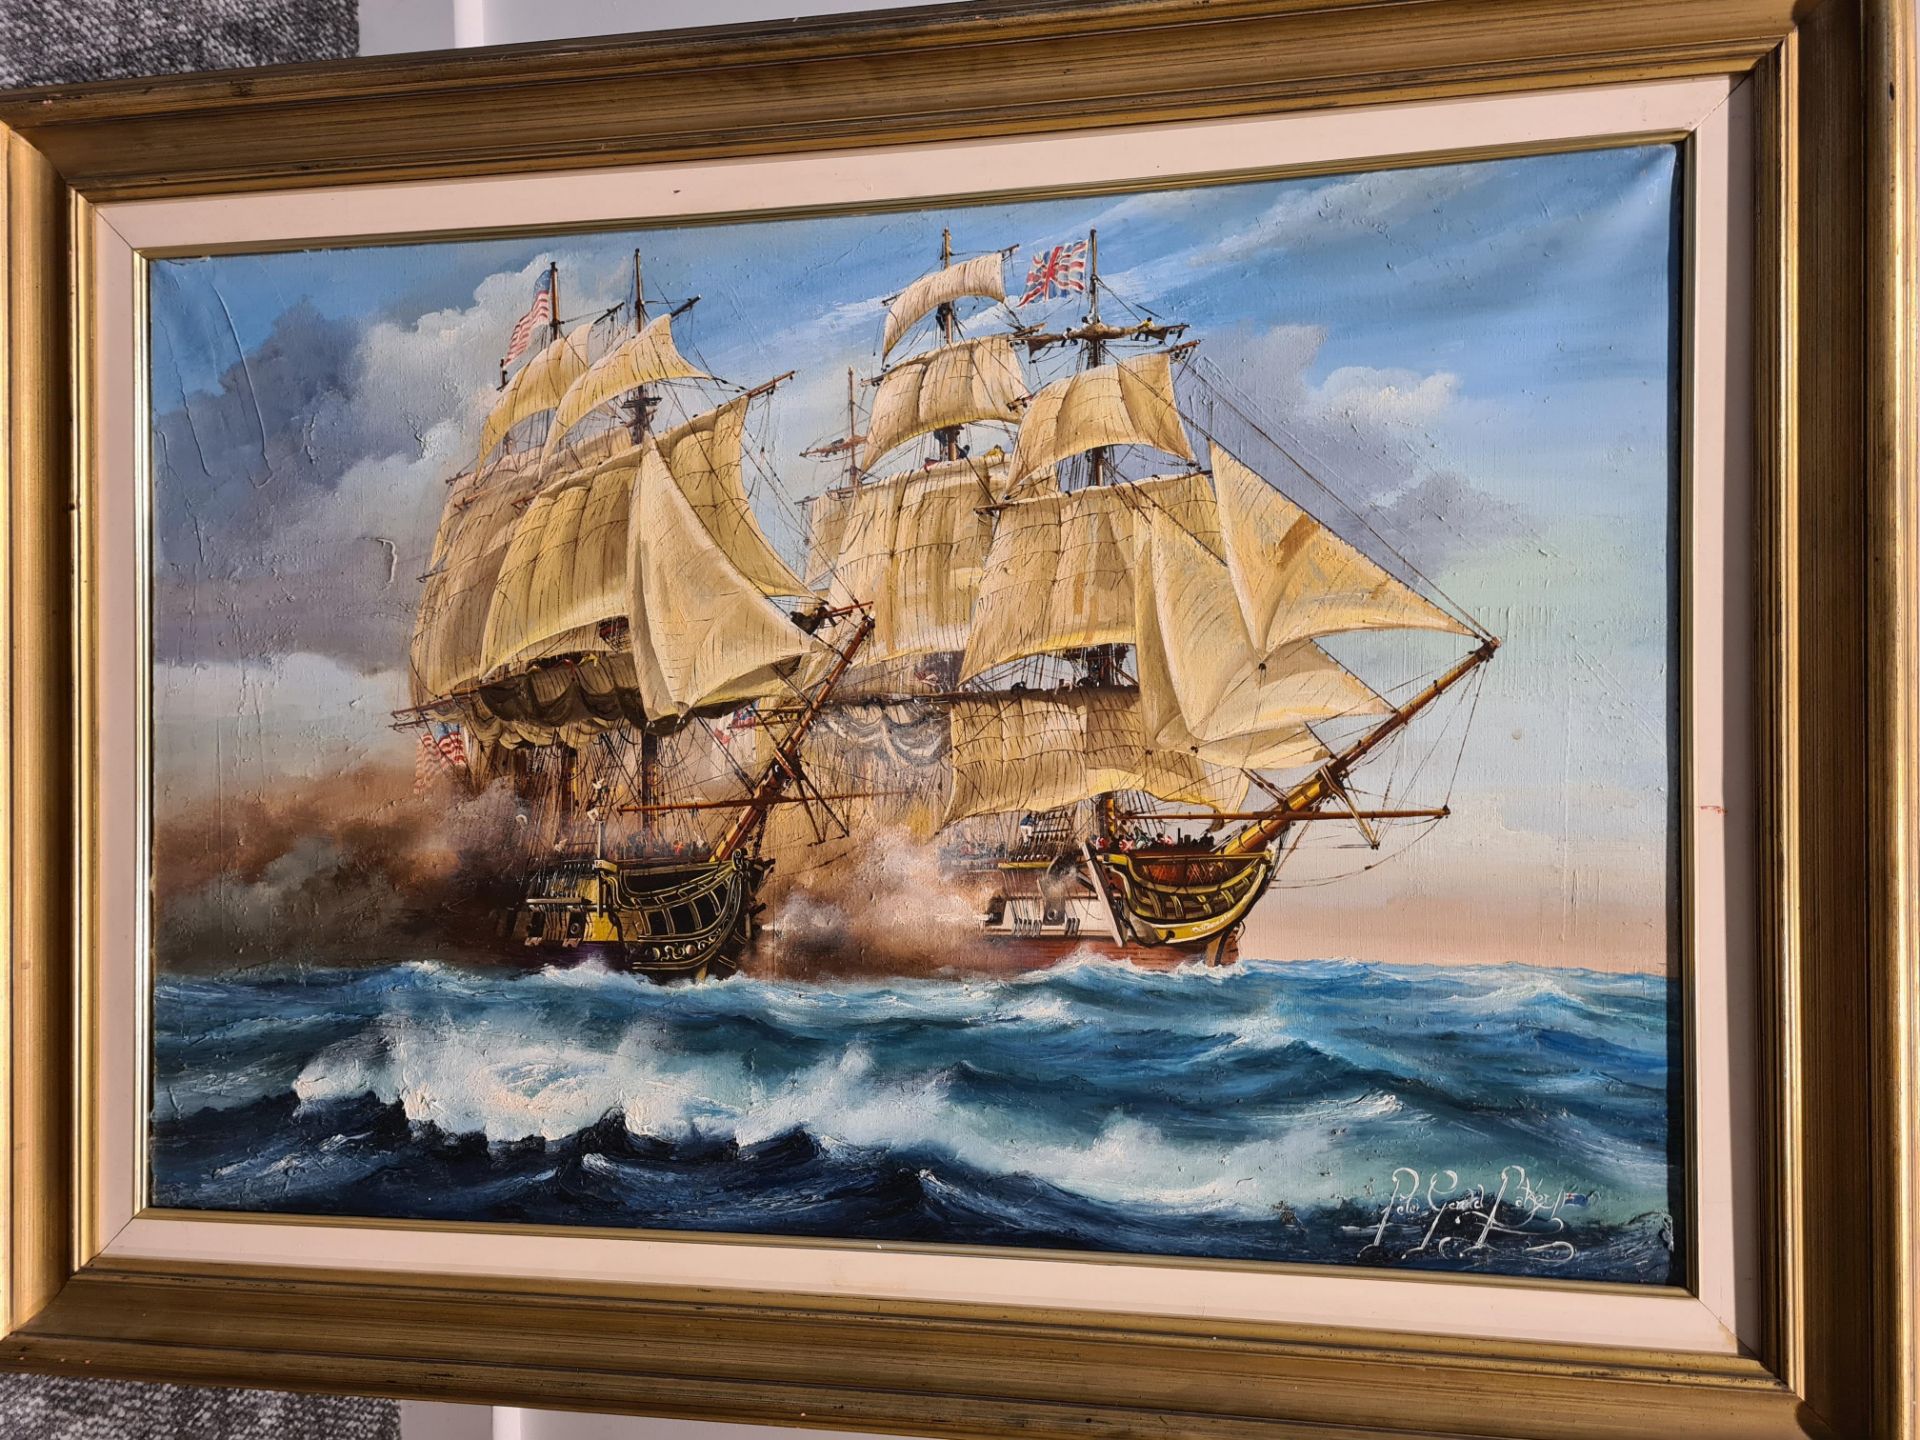 Signed and Framed Oil on Canvas Painting of Naval Battle By Pete Gerald Paker, 67cm x 92cm